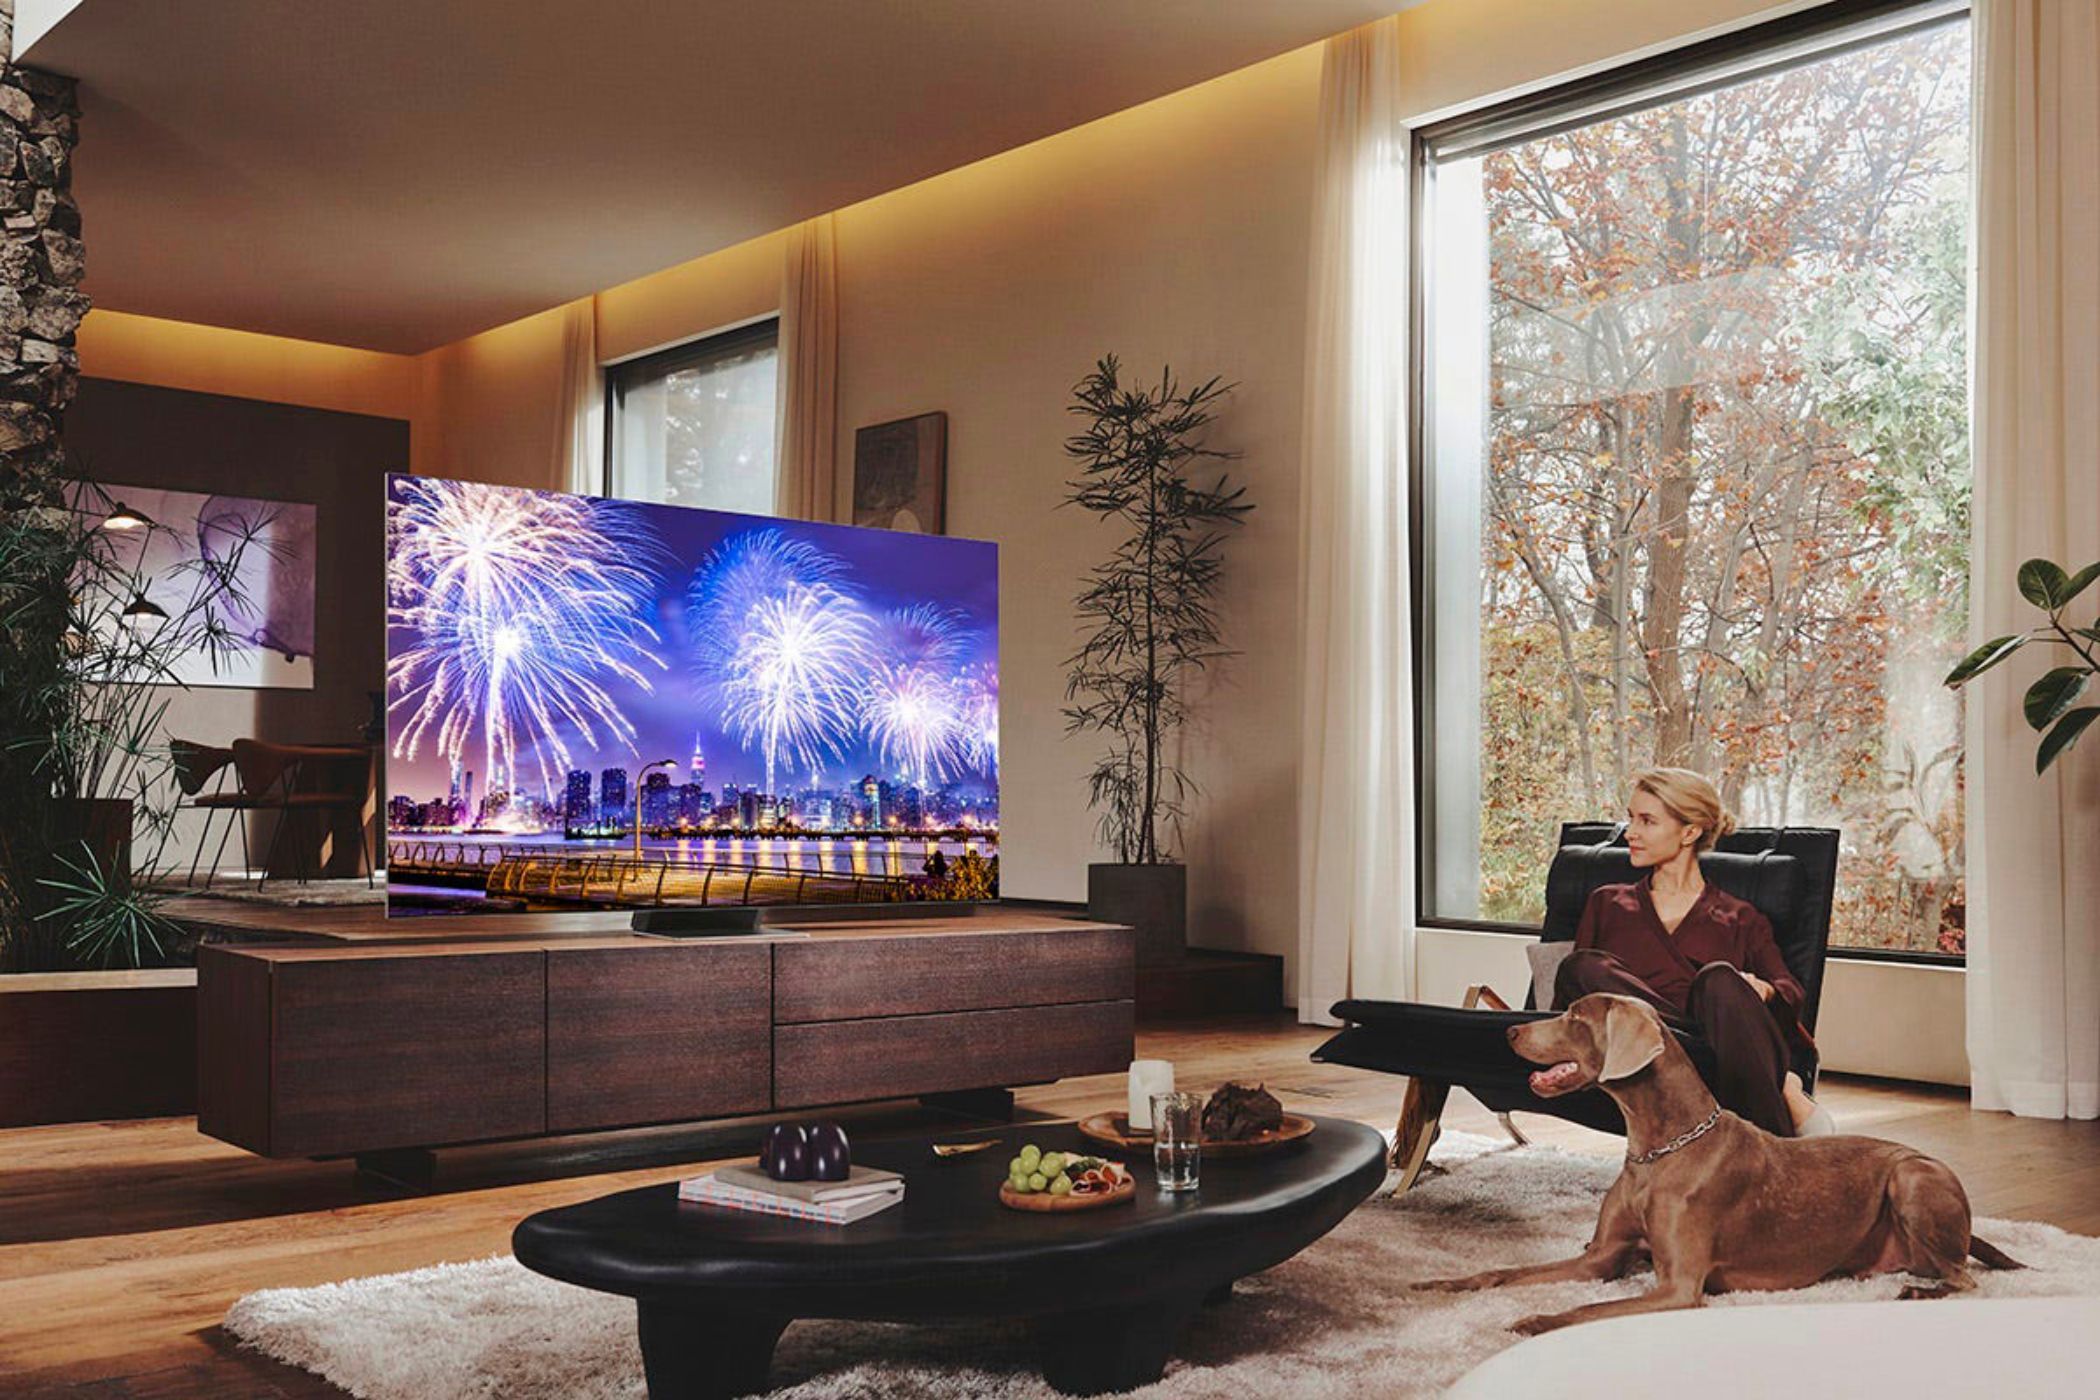 An image showing the Samsung Neo QLED 8K in a living room over a wooden cabinet with person sitting in front of it on a couch with a dog.